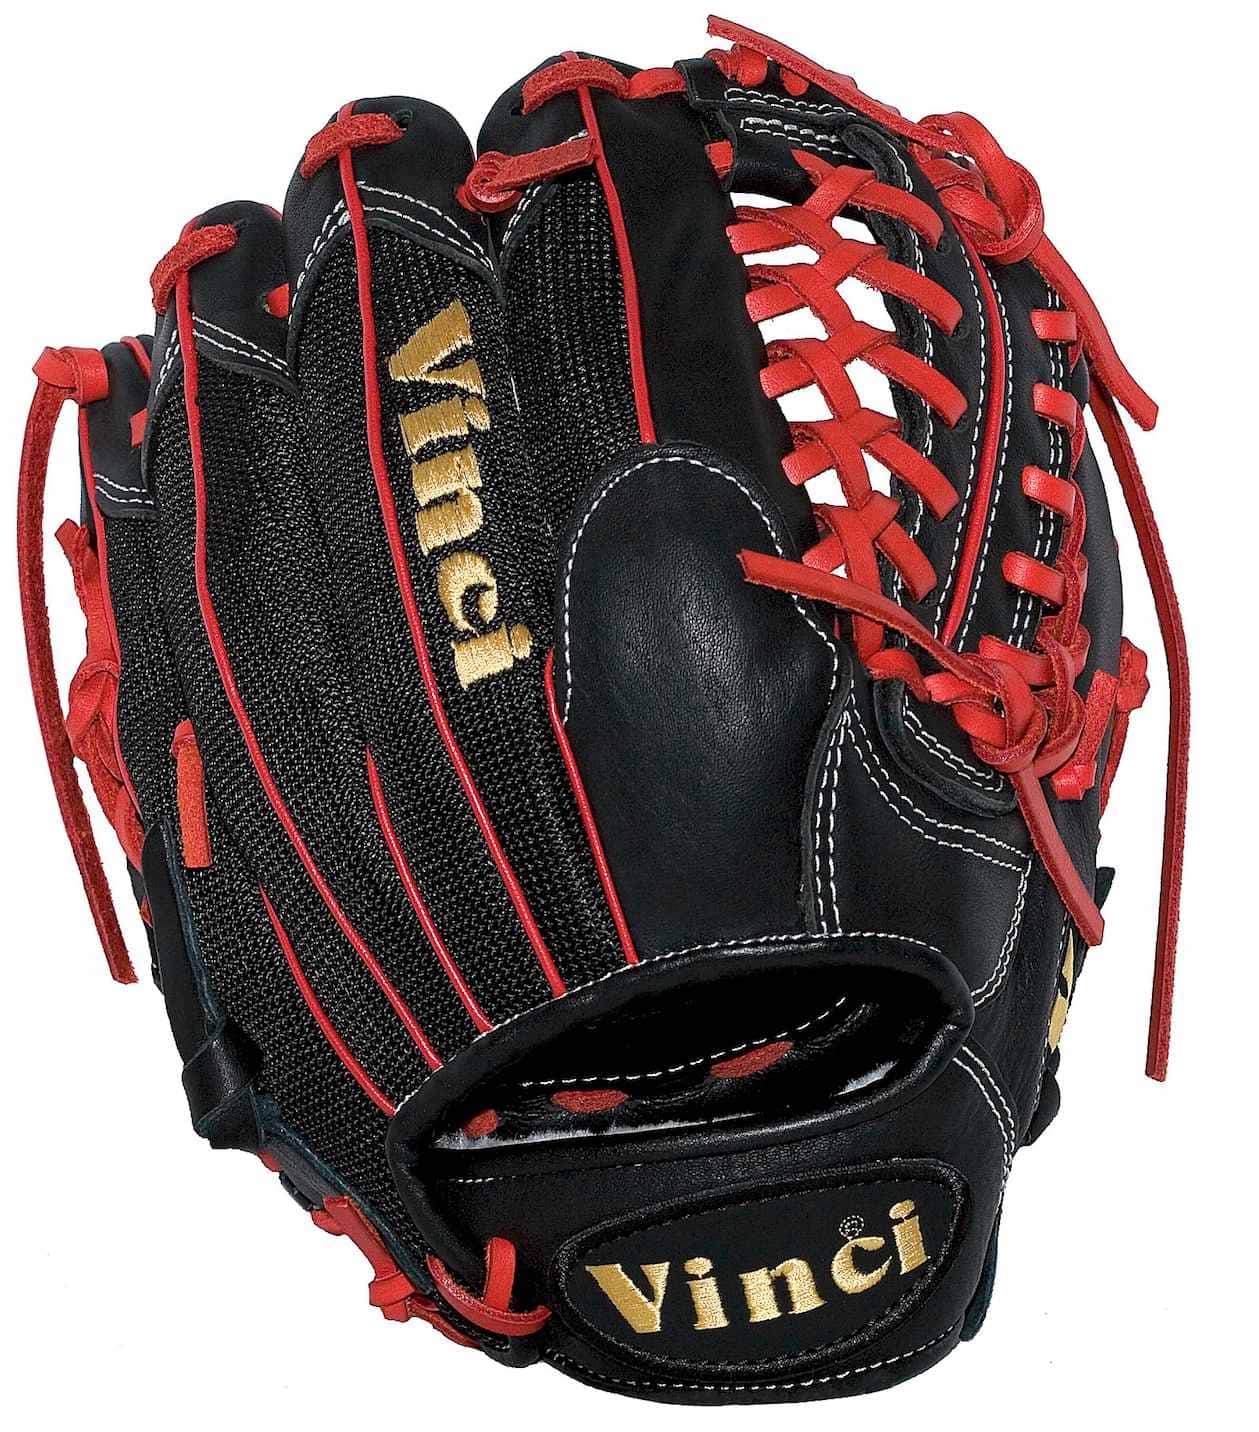 11.5 inch Baseball Glove-JC3333-22 with Black Mesh Back, Red Lace and Red  Welting - Vinci Baseball Gloves, Softball Gloves and Sports Equipment